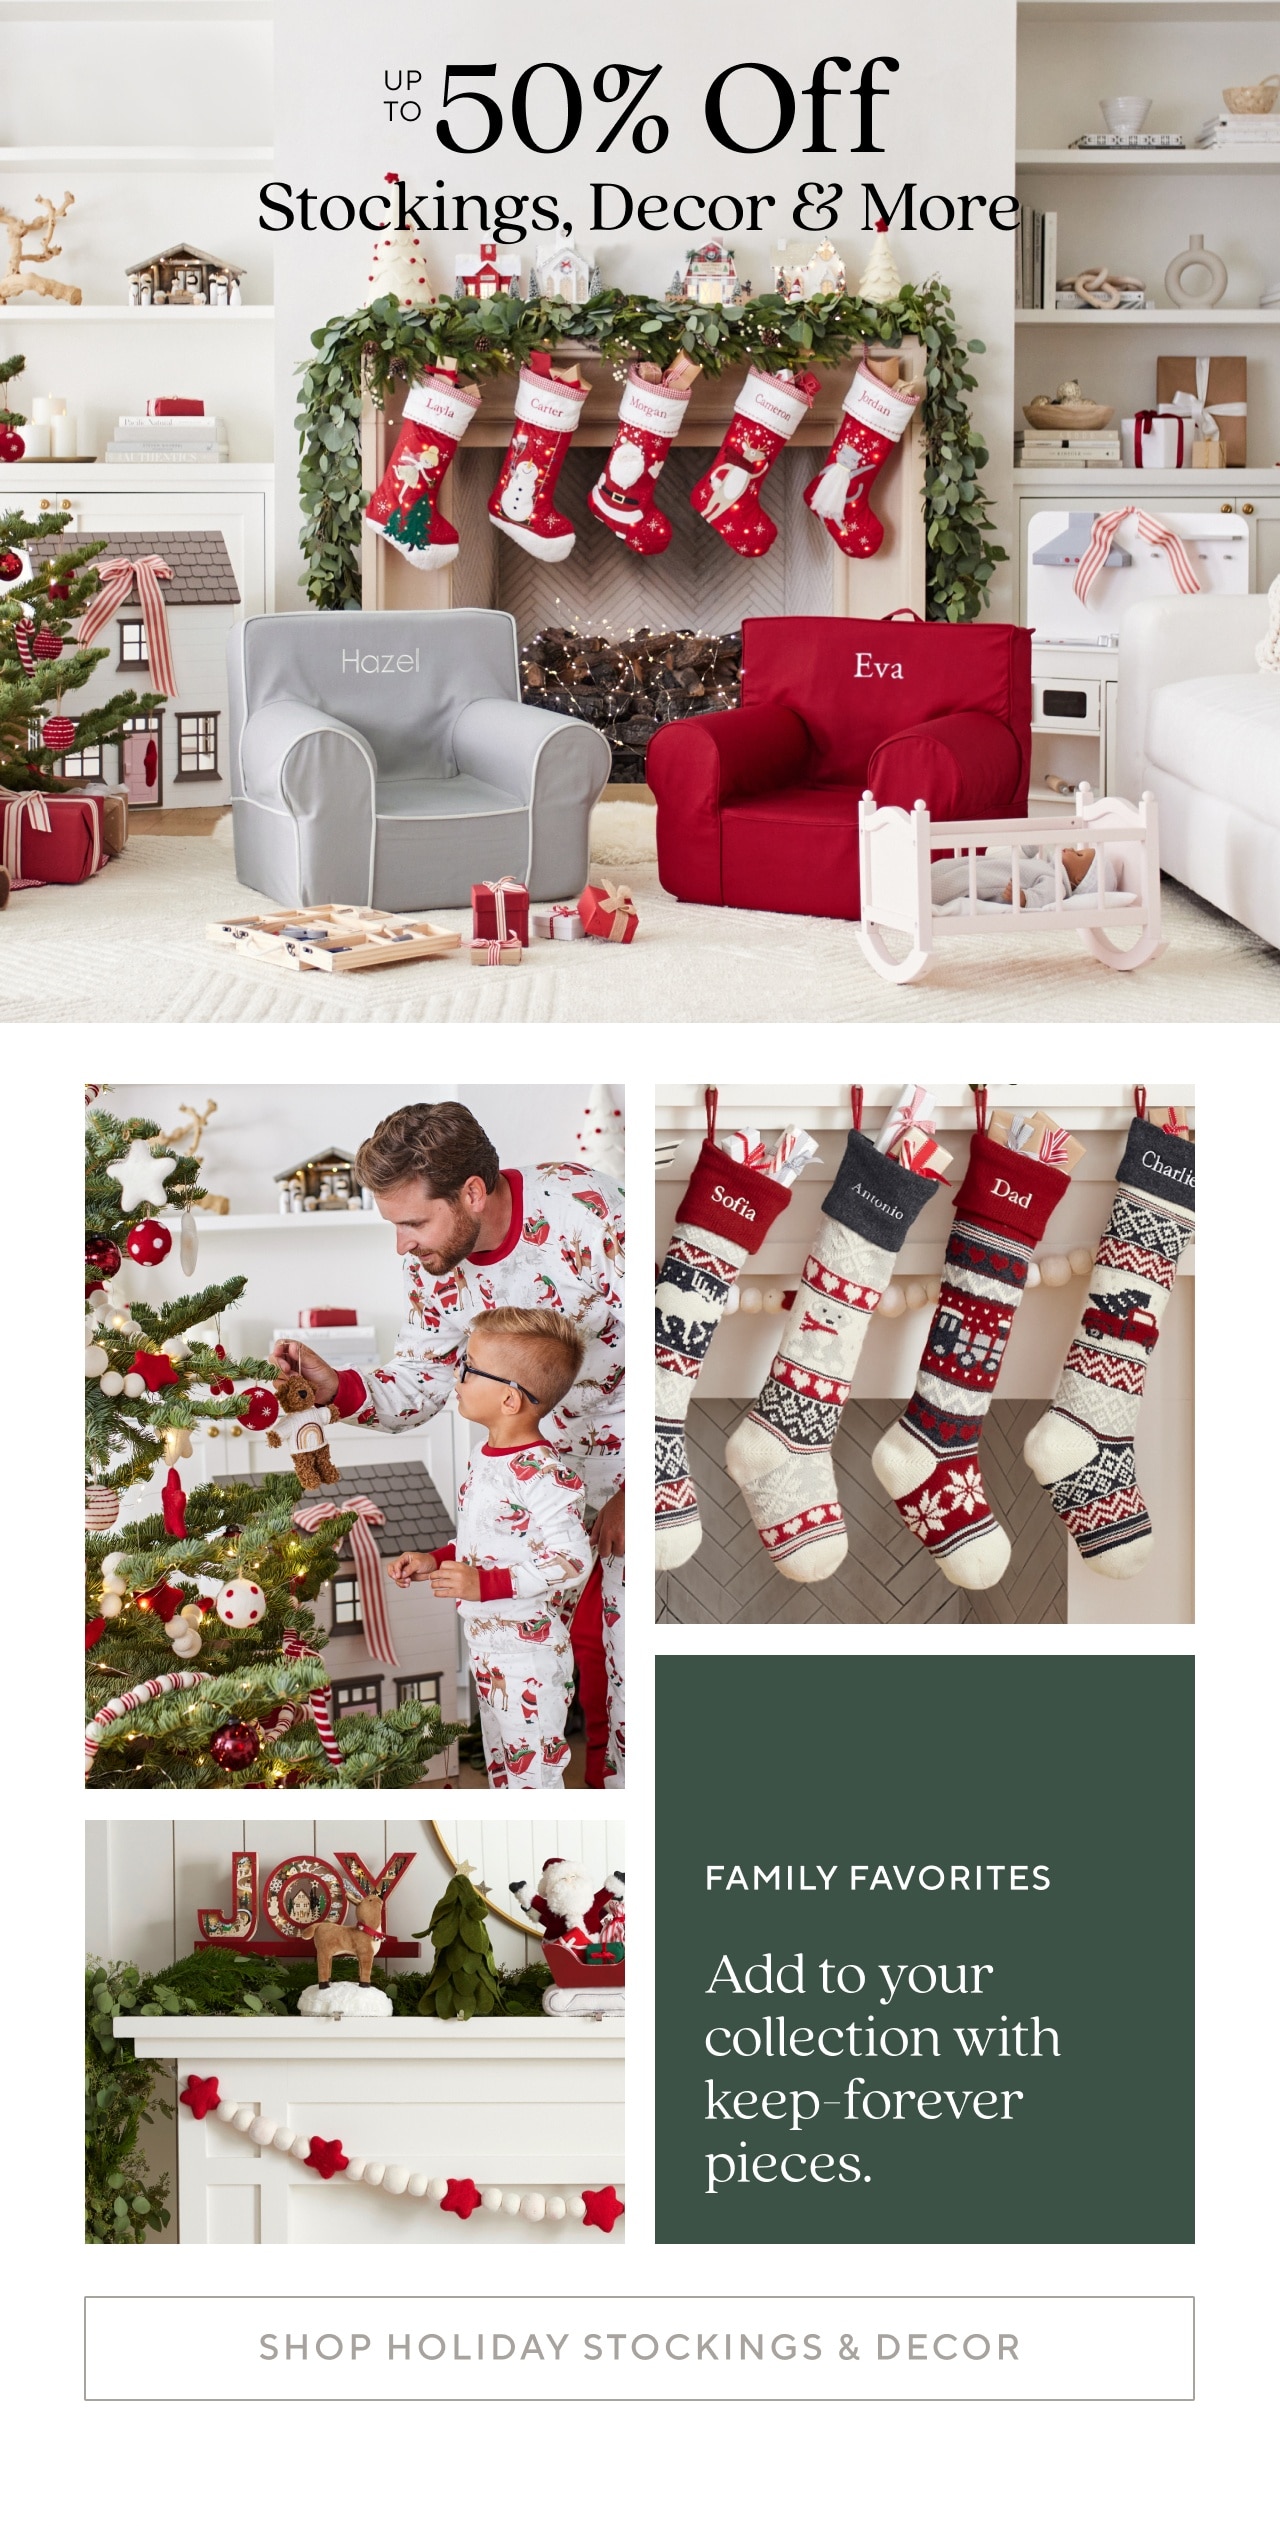 SHOP HOLIDAY STOCKINGS AND DECOR